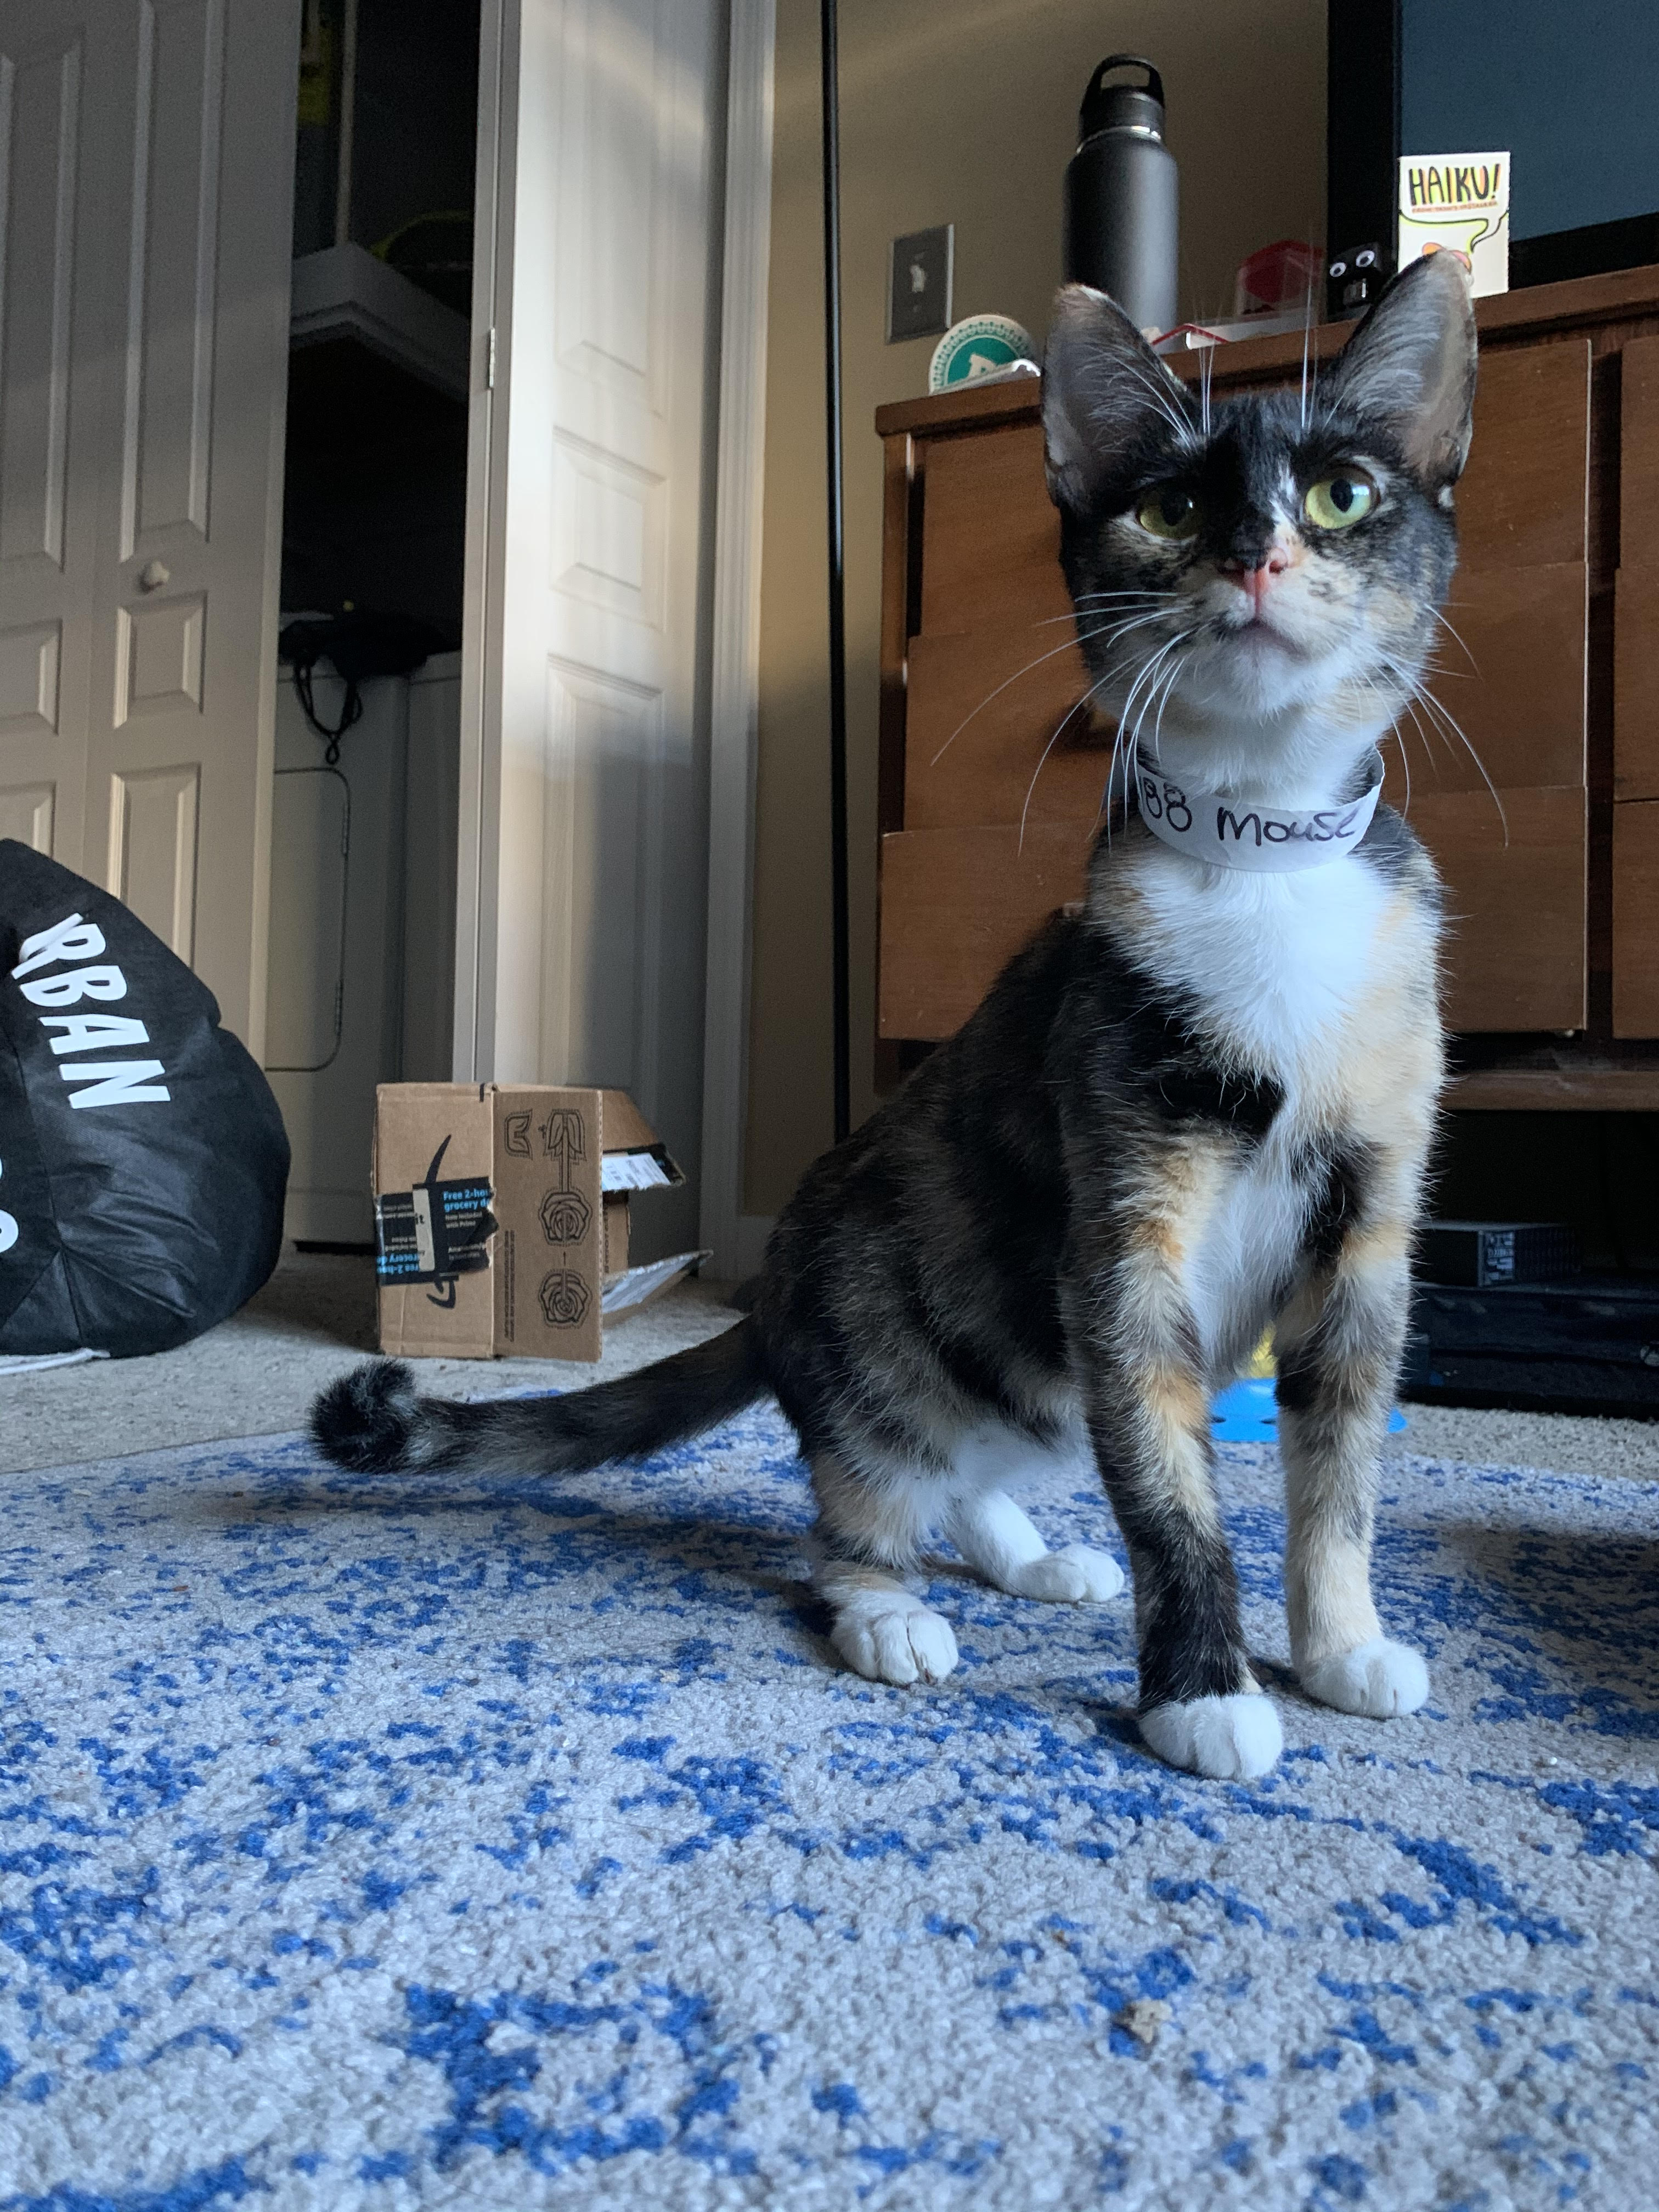 Mouse - a 1 year old calico cat sitting in a living room